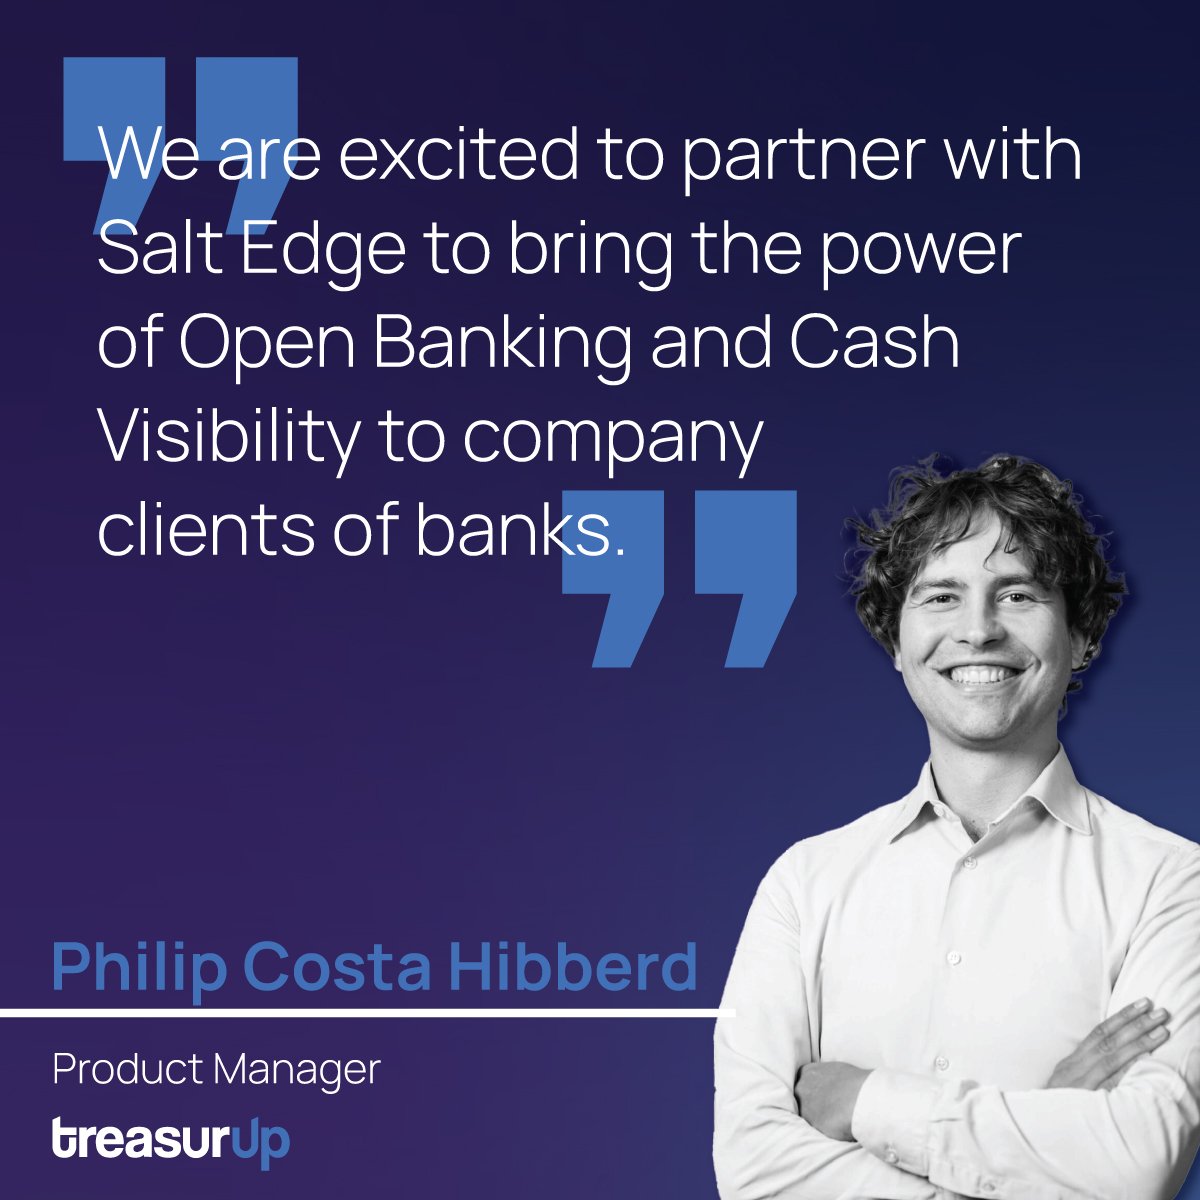 A screenshot of a quote from Philip Costa Hibberd, representing TreasurUp, discussing their partnership with Salt Edge